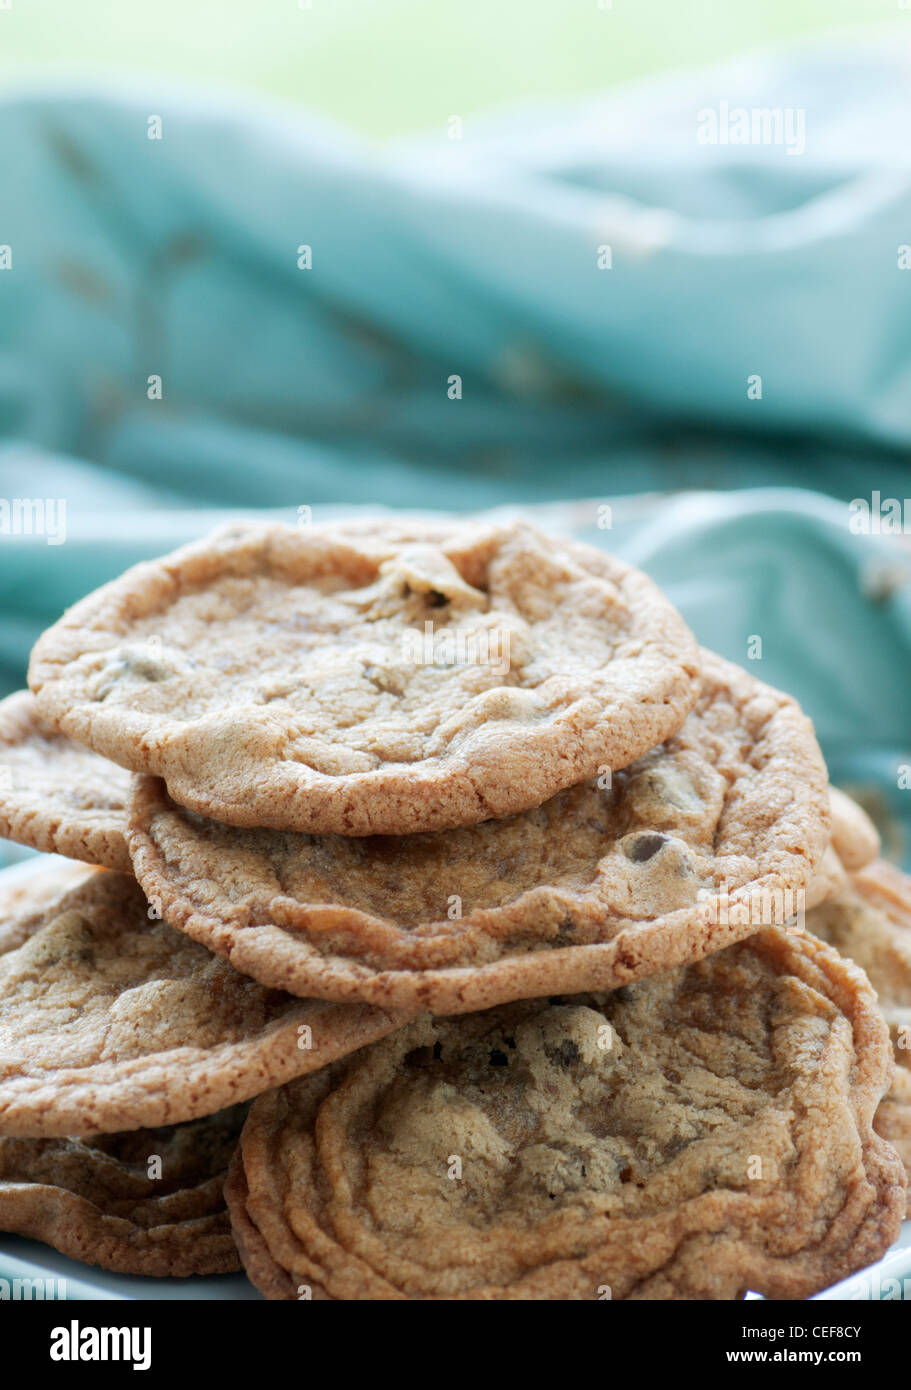 Pile of soft chewy homemade chocolate chip cookies Stock Photo